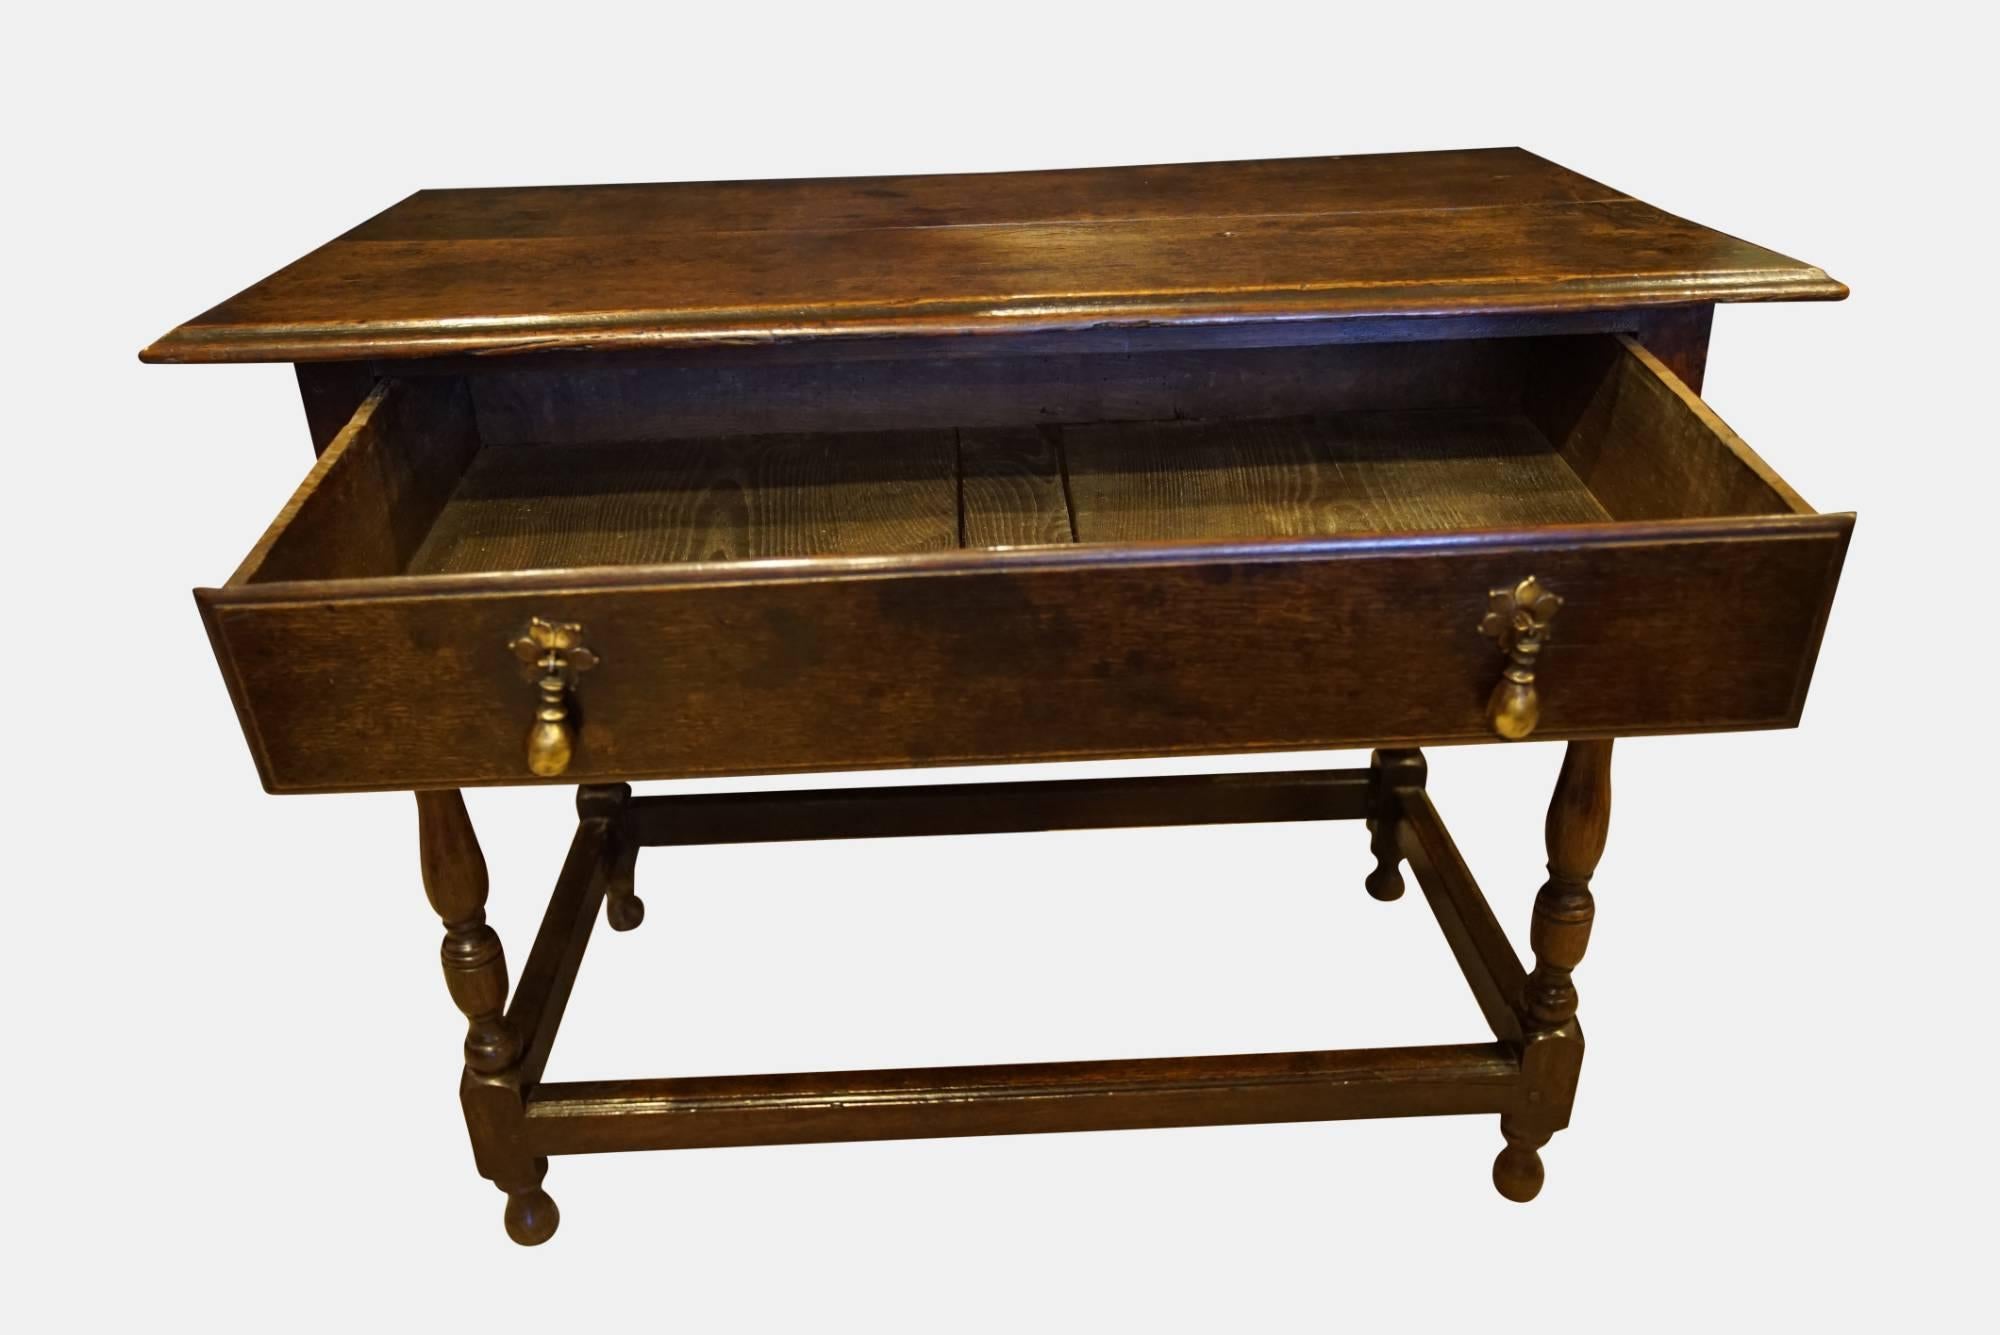 An 18th century oak side table on baluster turned legs and molded stretchers with a single drawer,

circa 1760.